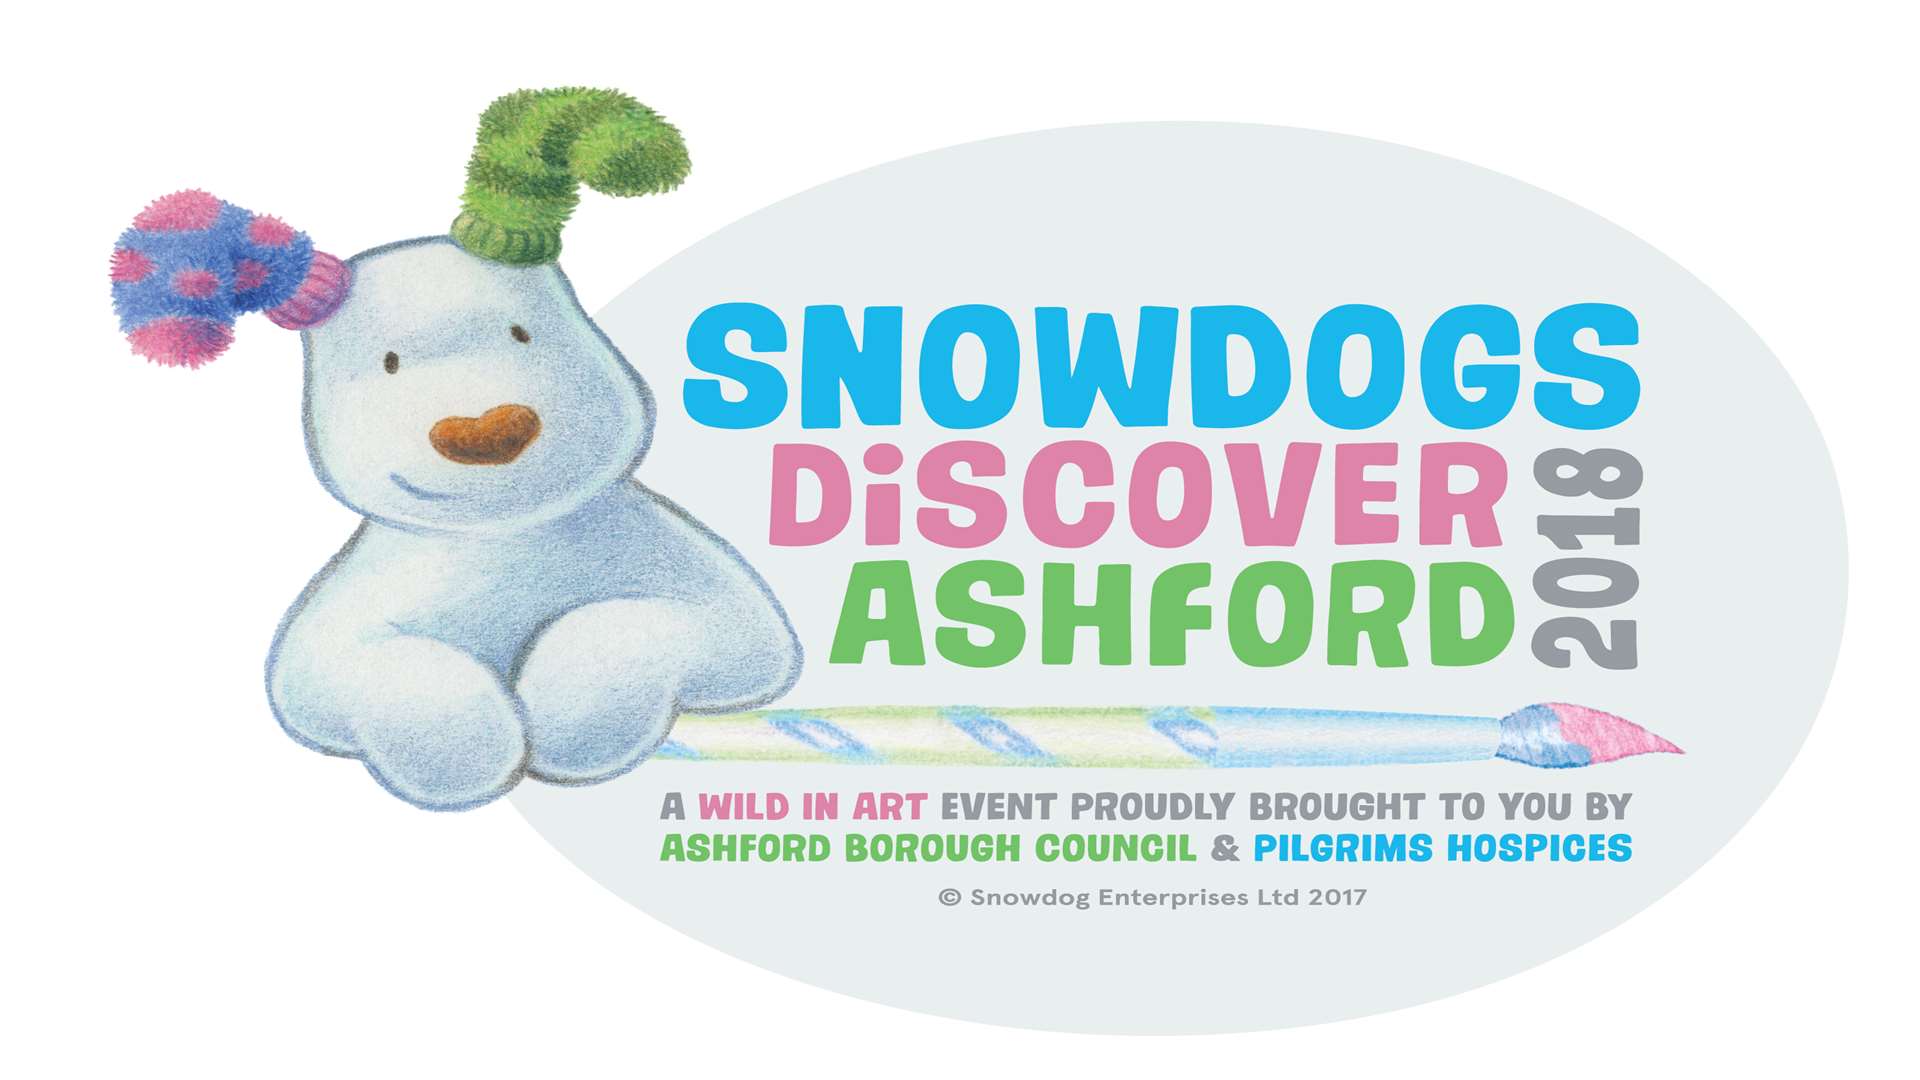 Artists are need to help decorate Snowdogs